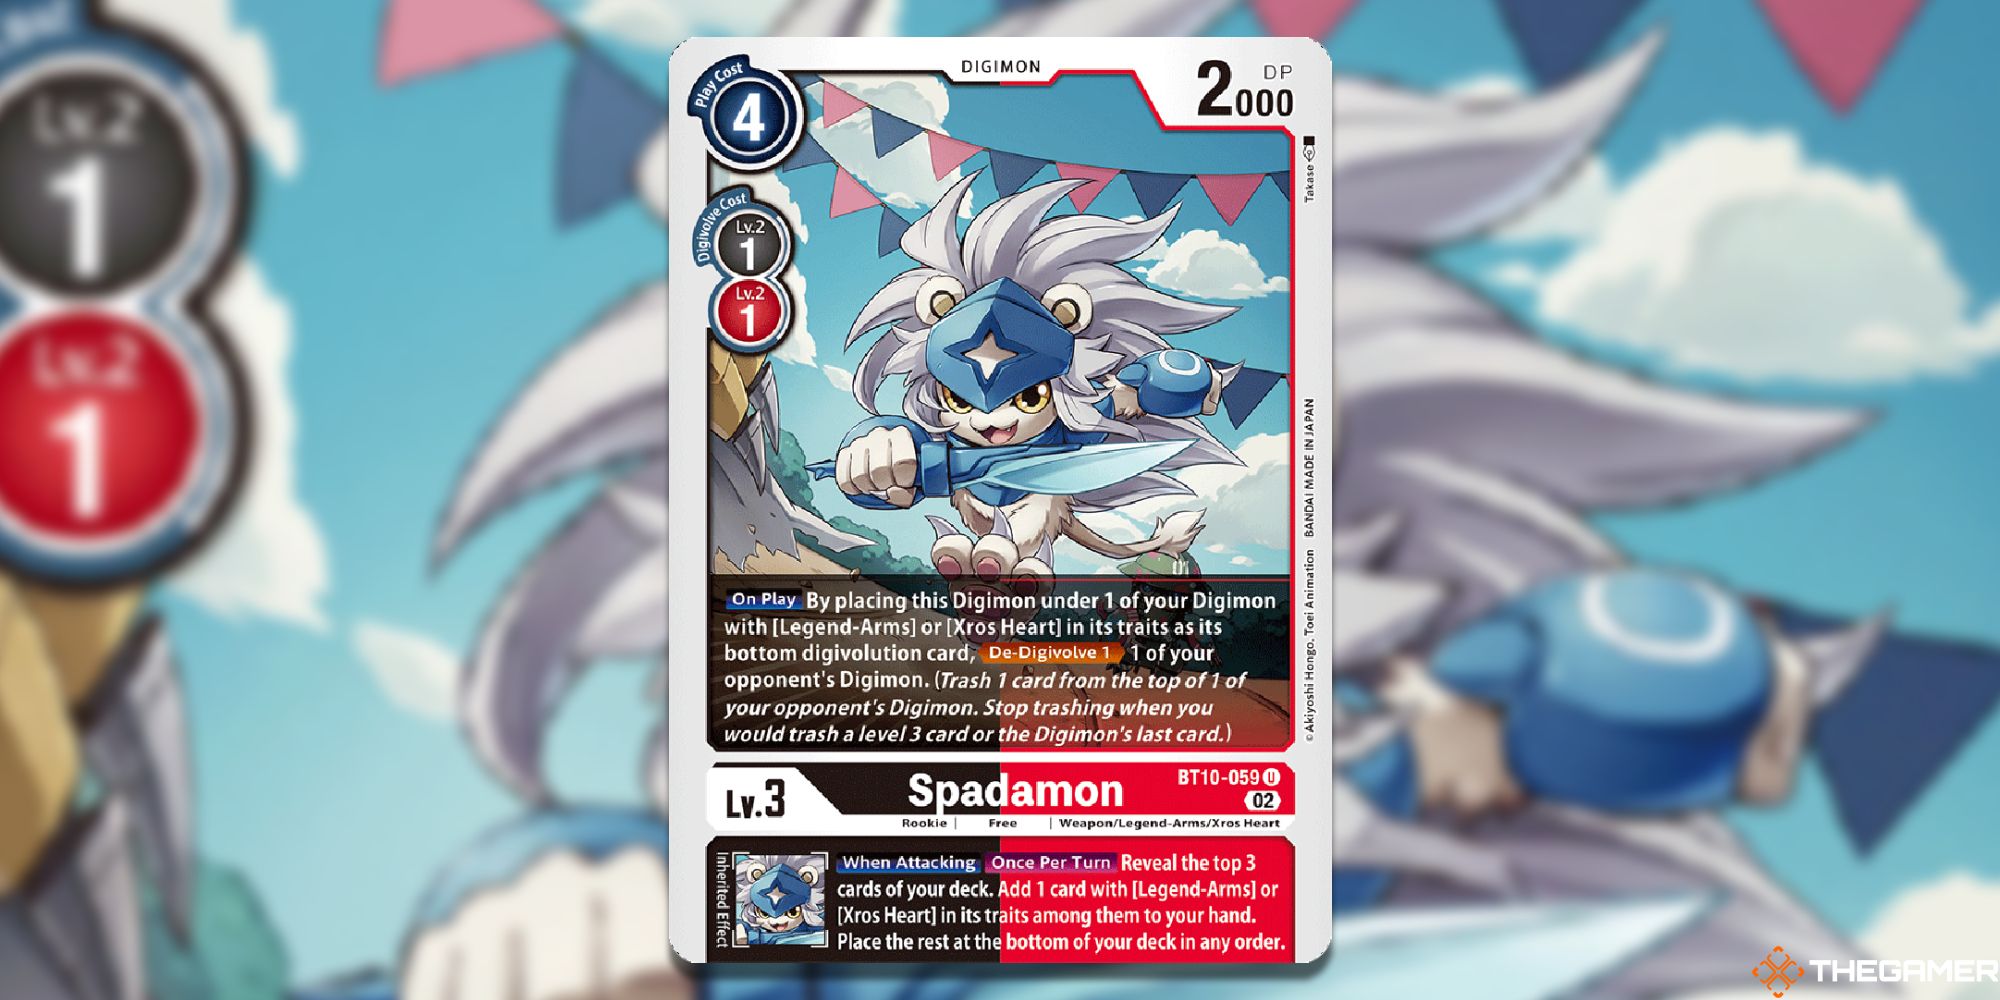 spadamon card image with blur from bt10 digimon card game 